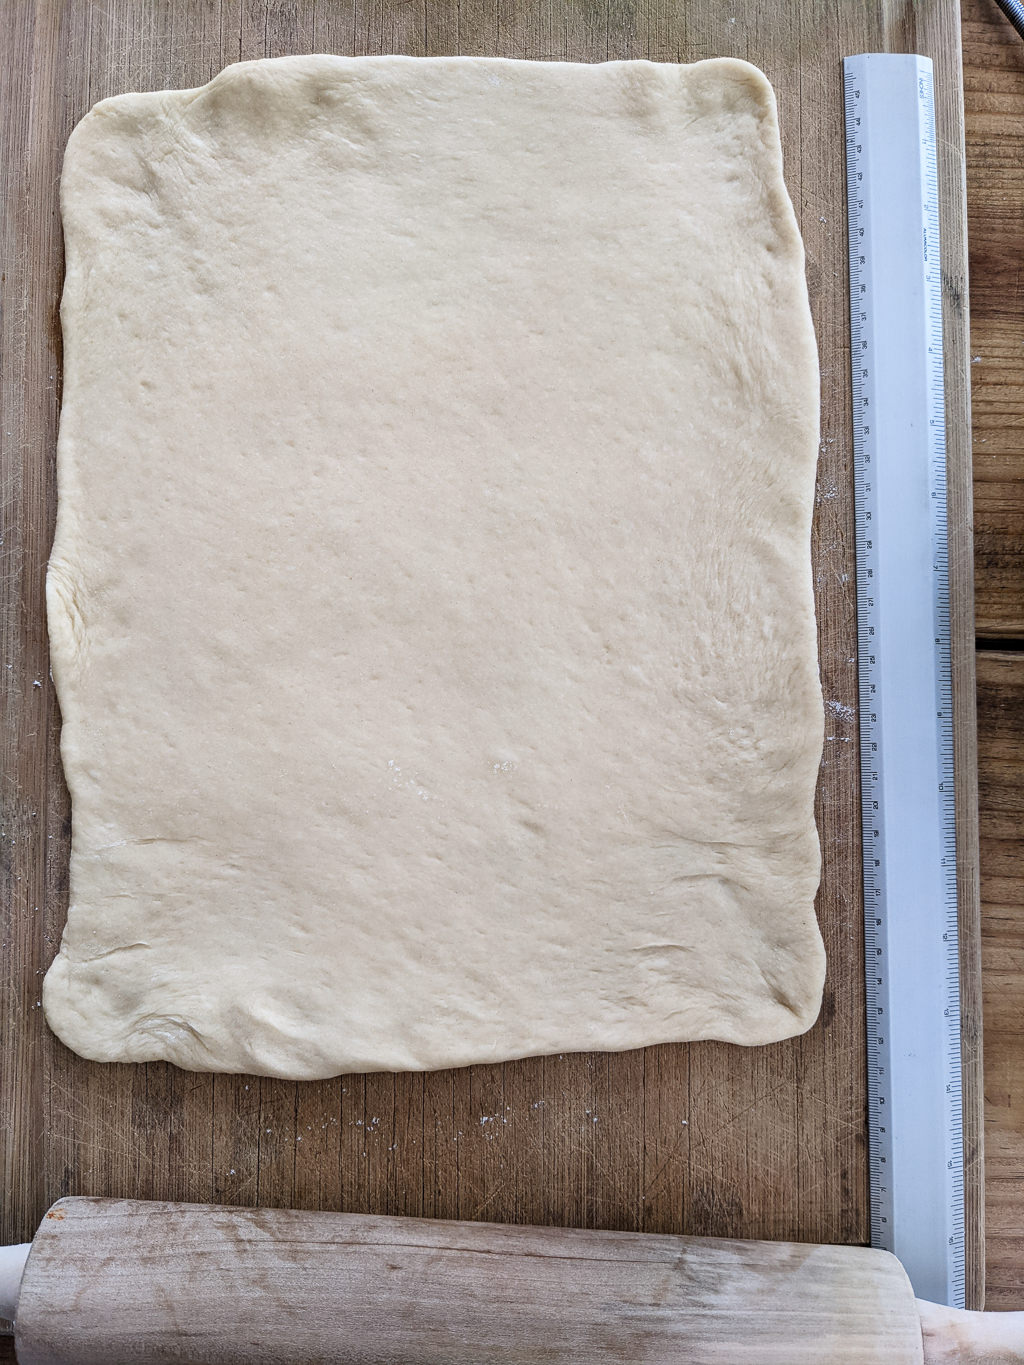 Yeasted sweet bread dough rolled into a rectangle